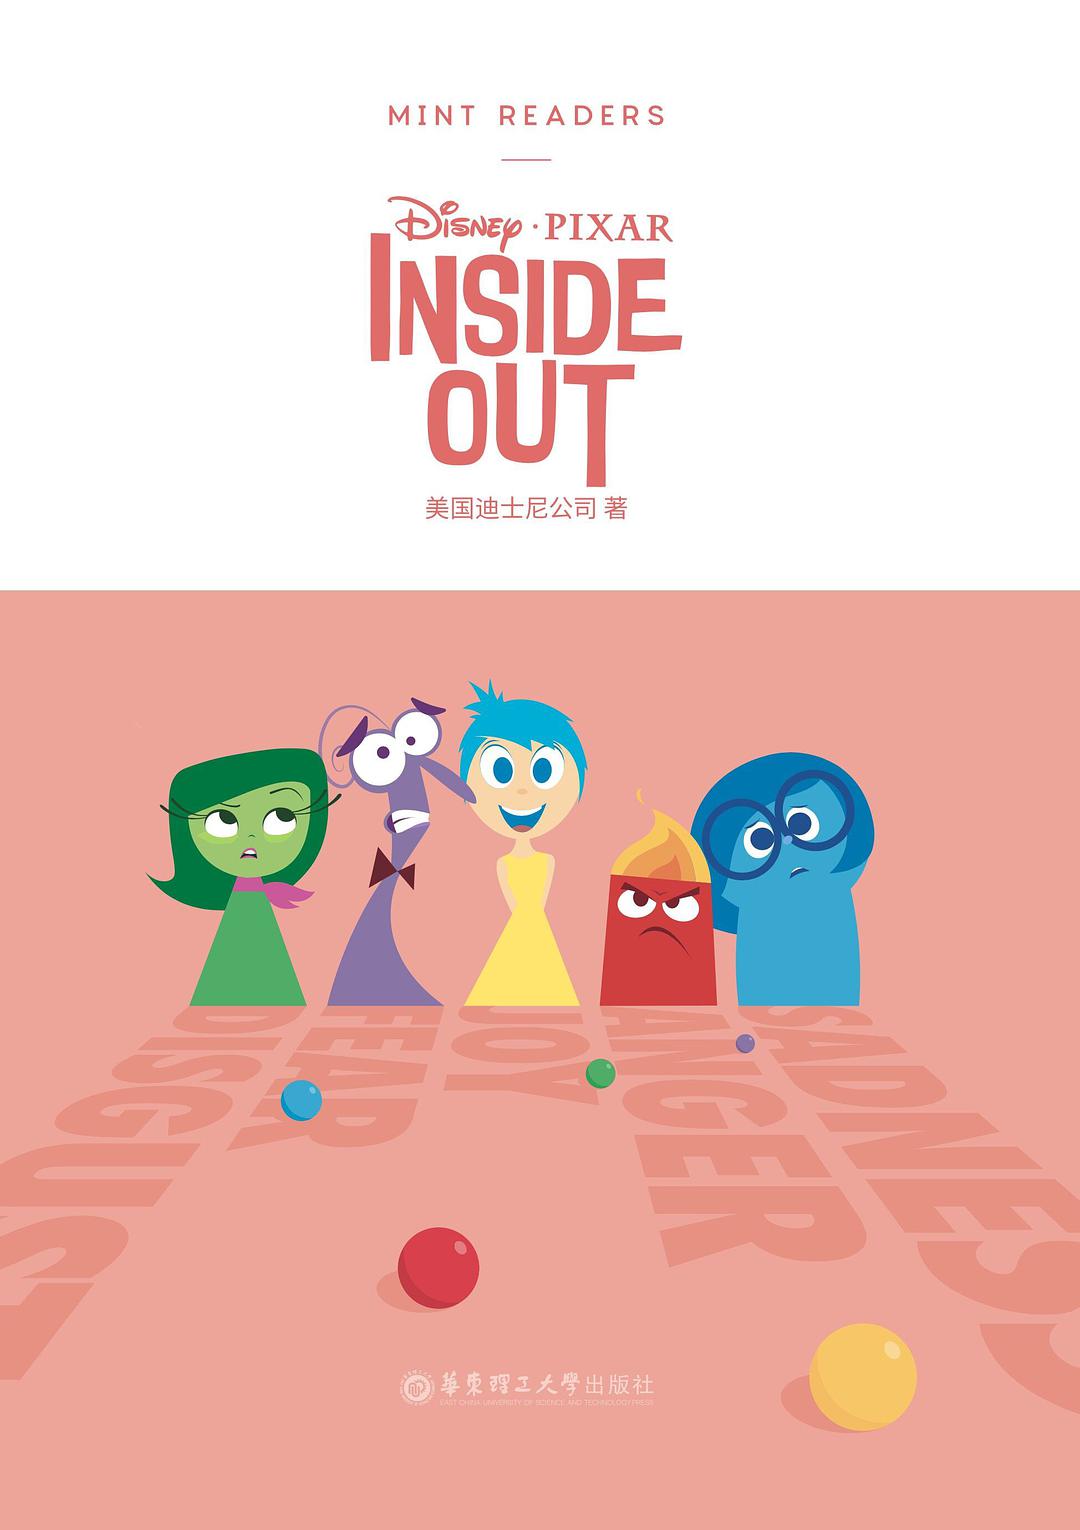 Mint Readers: Inside Out